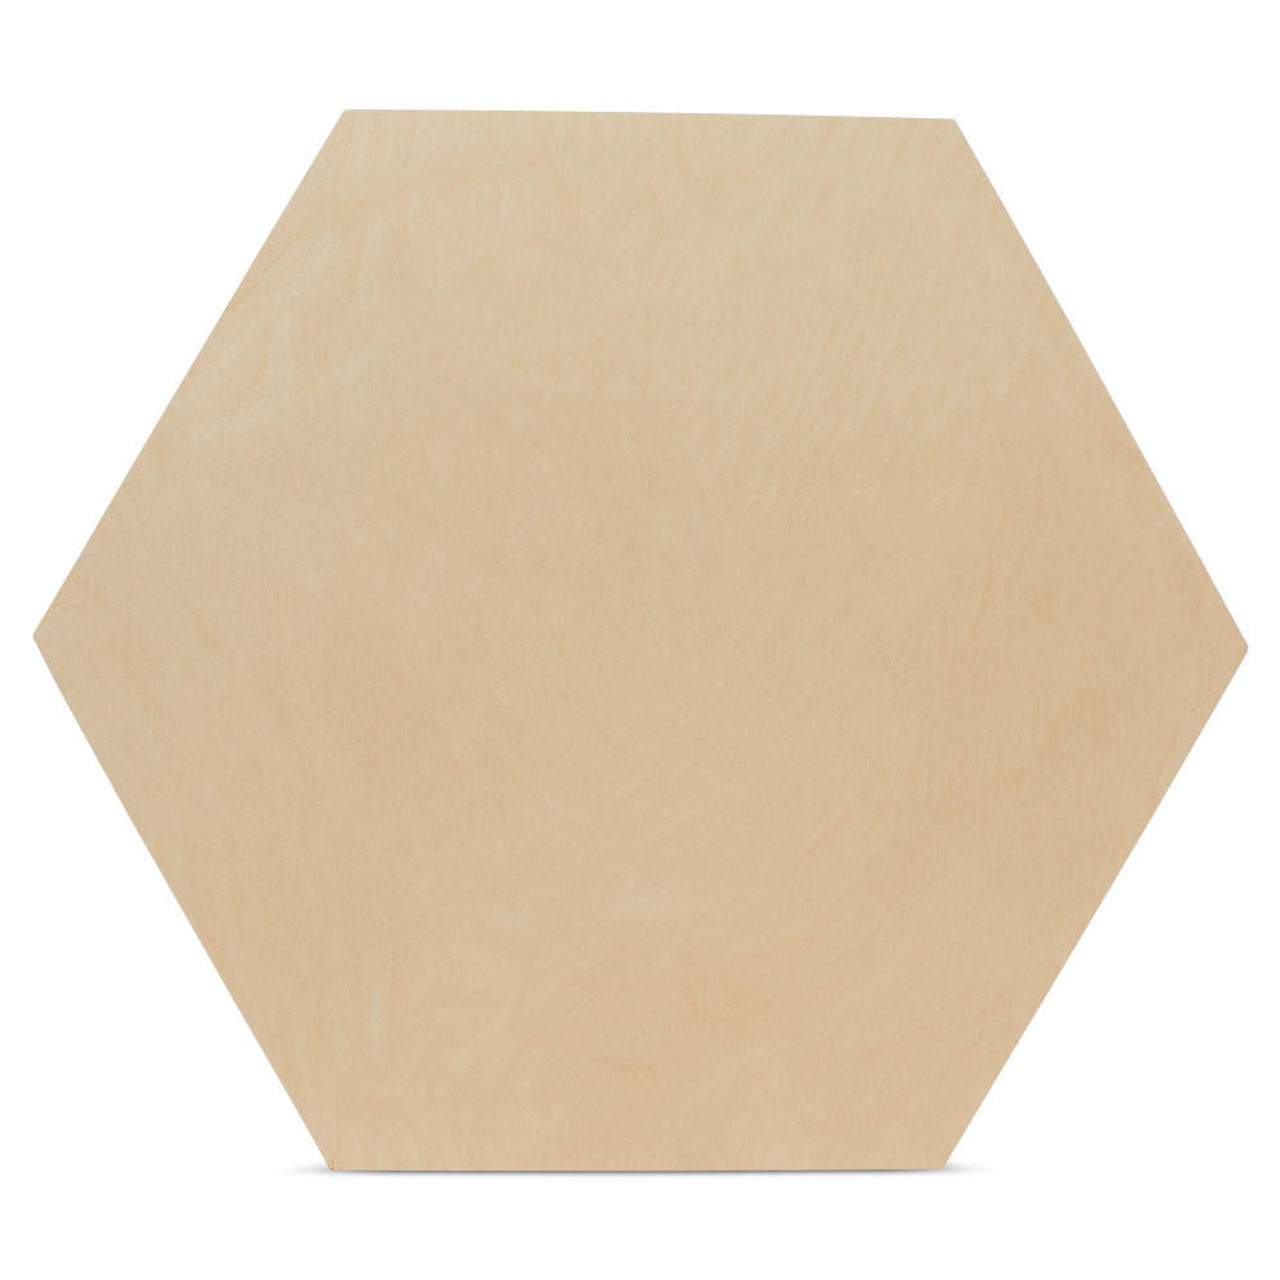 Krafty Supply Wood hexagon, 1/4 Thick MDF, 8 inches 